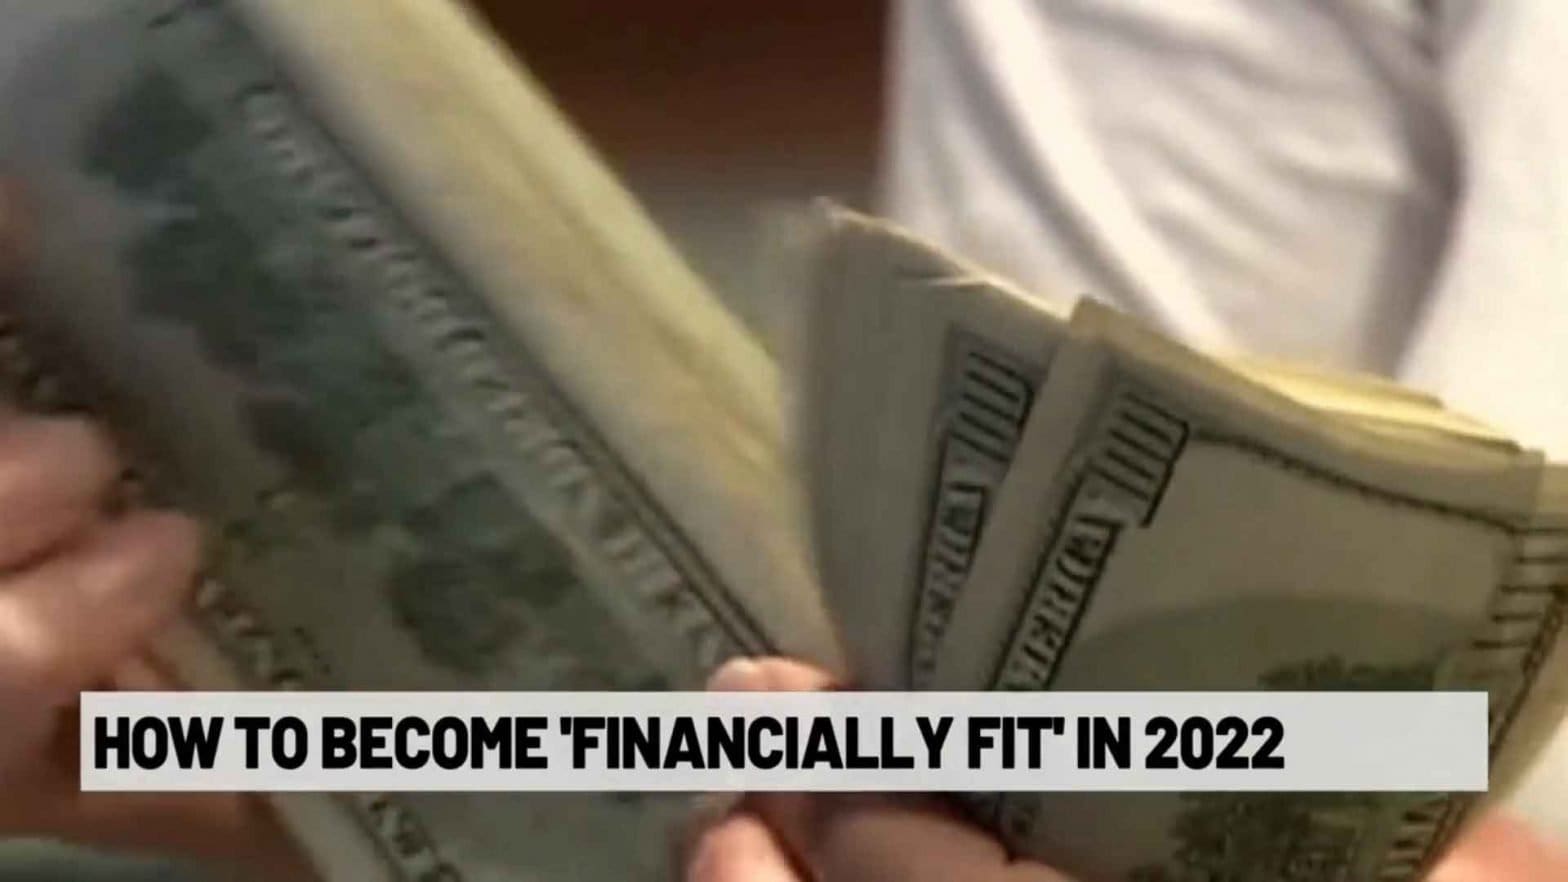 How to become Financially fit in 2022